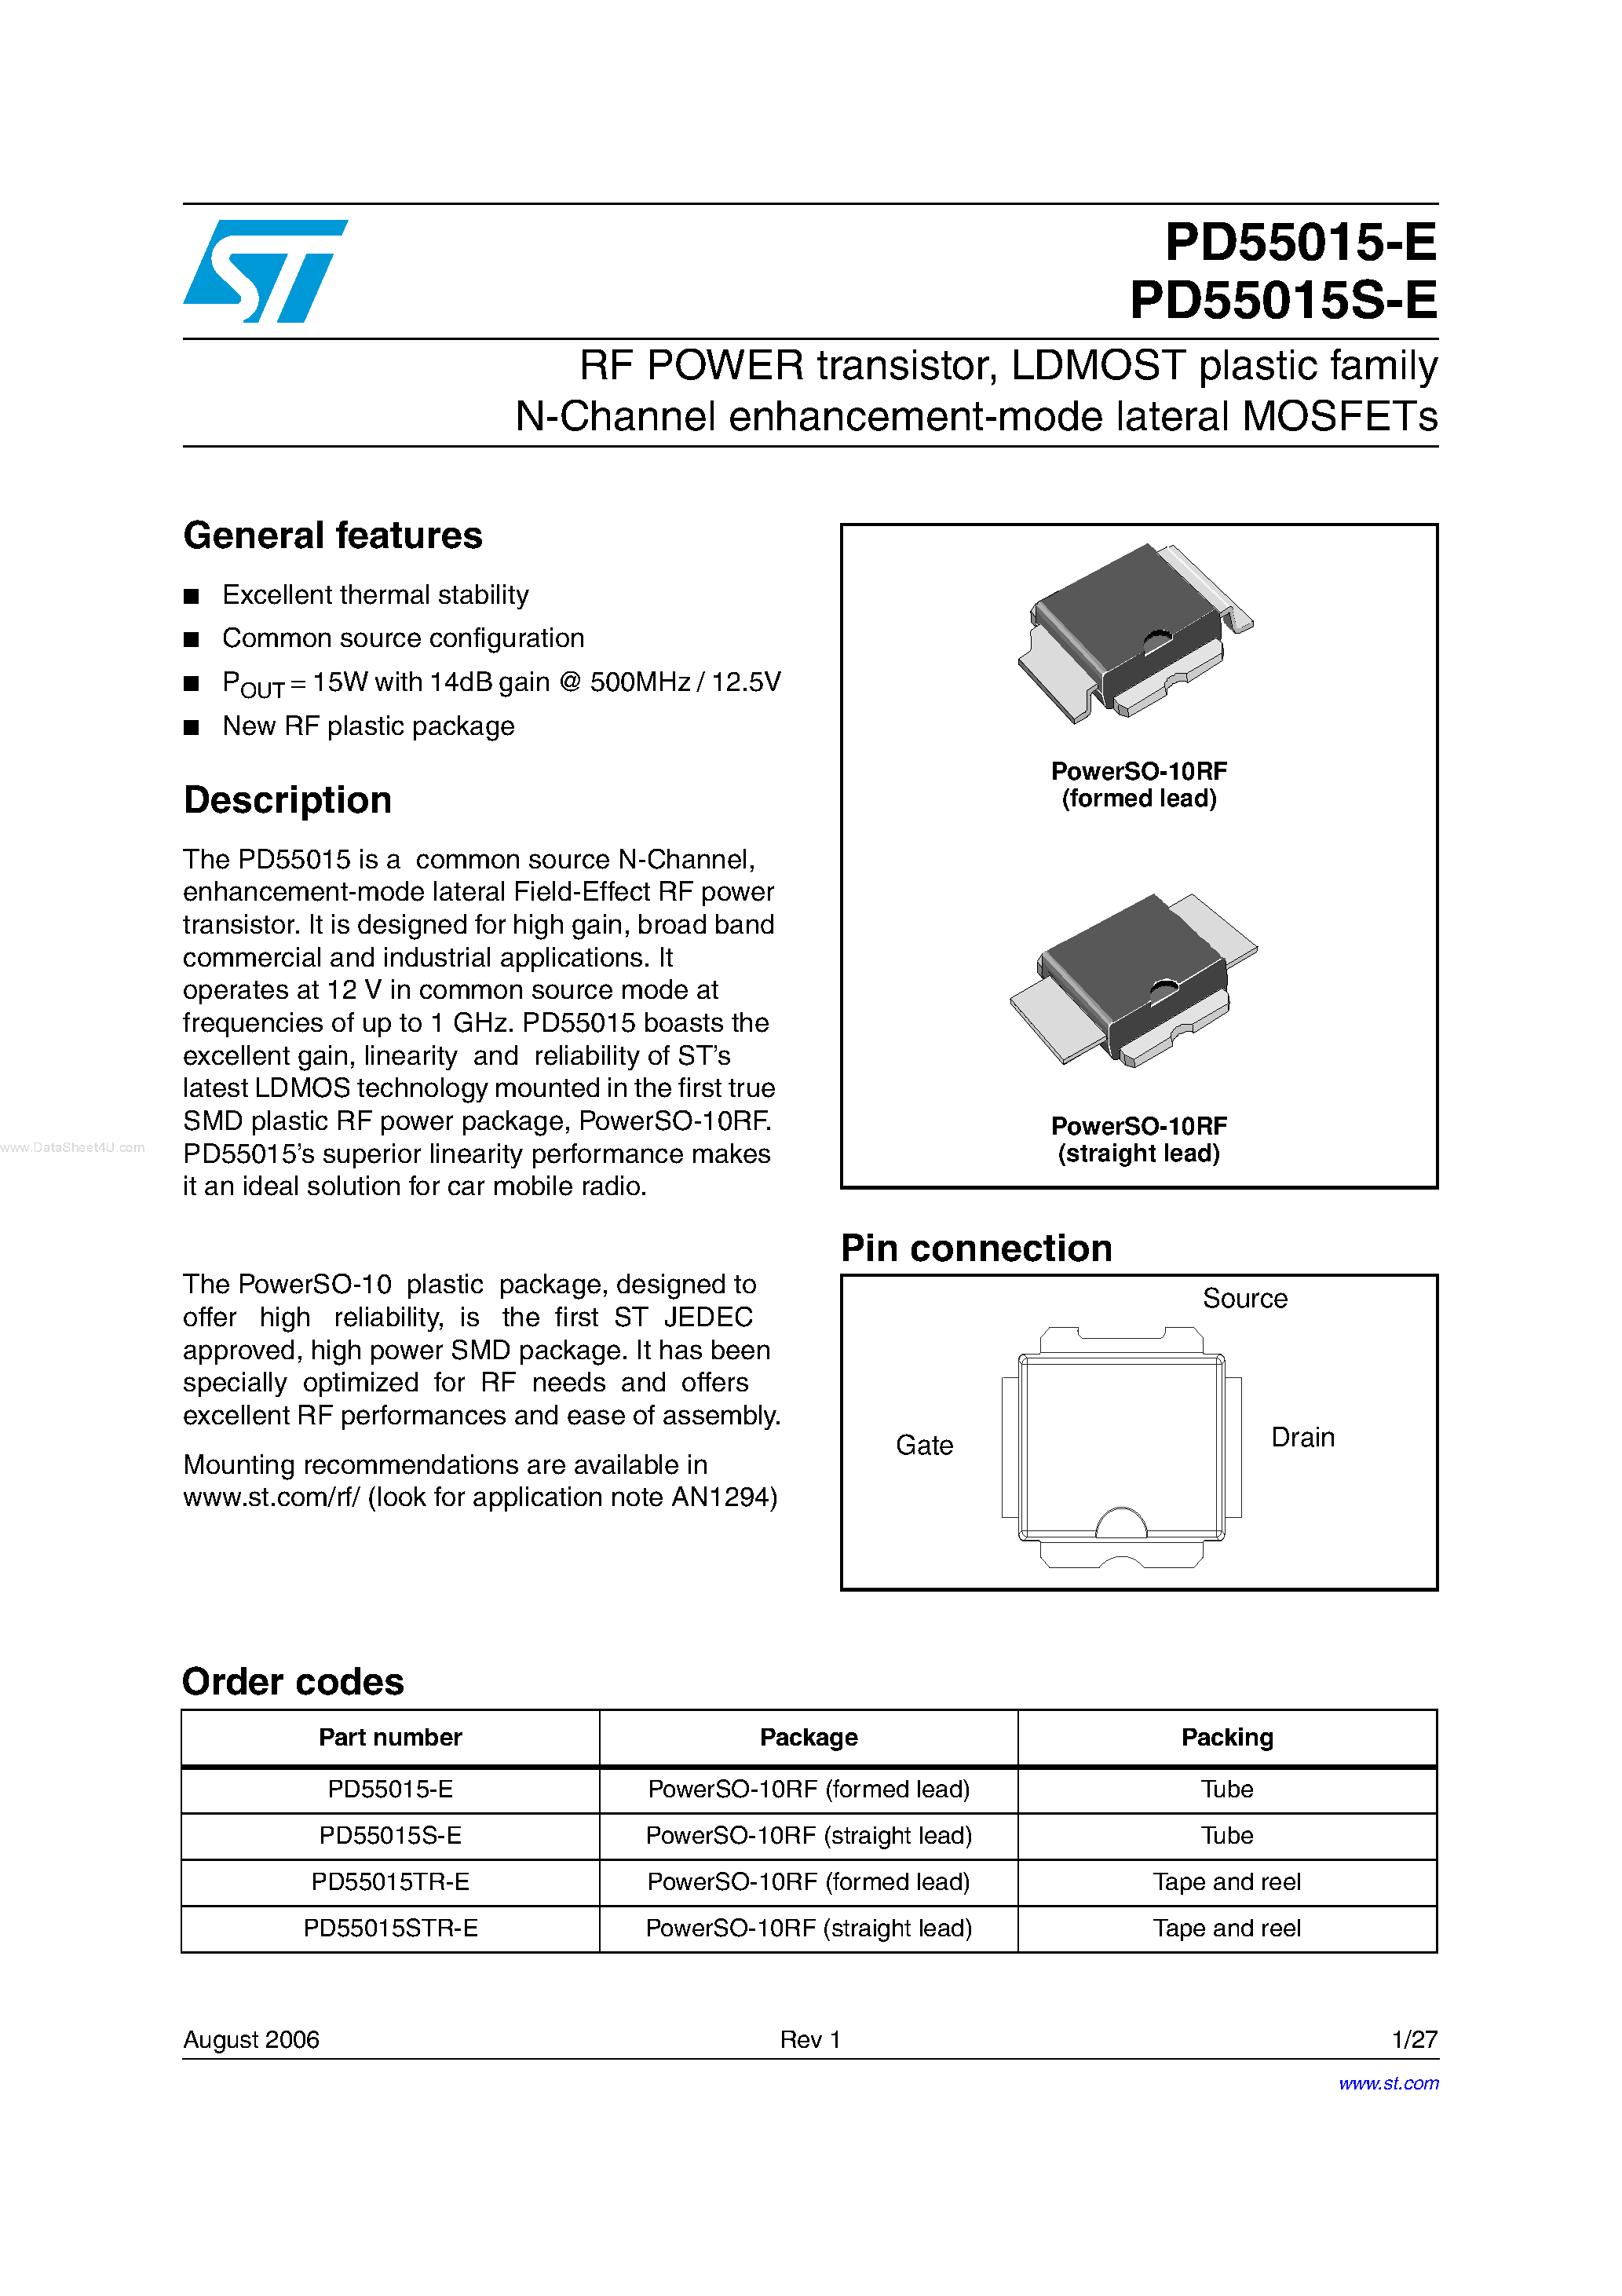 Даташит PD55015-E - LDMOST plastic family N-Channel enhancement-mode lateral MOSFETs страница 1